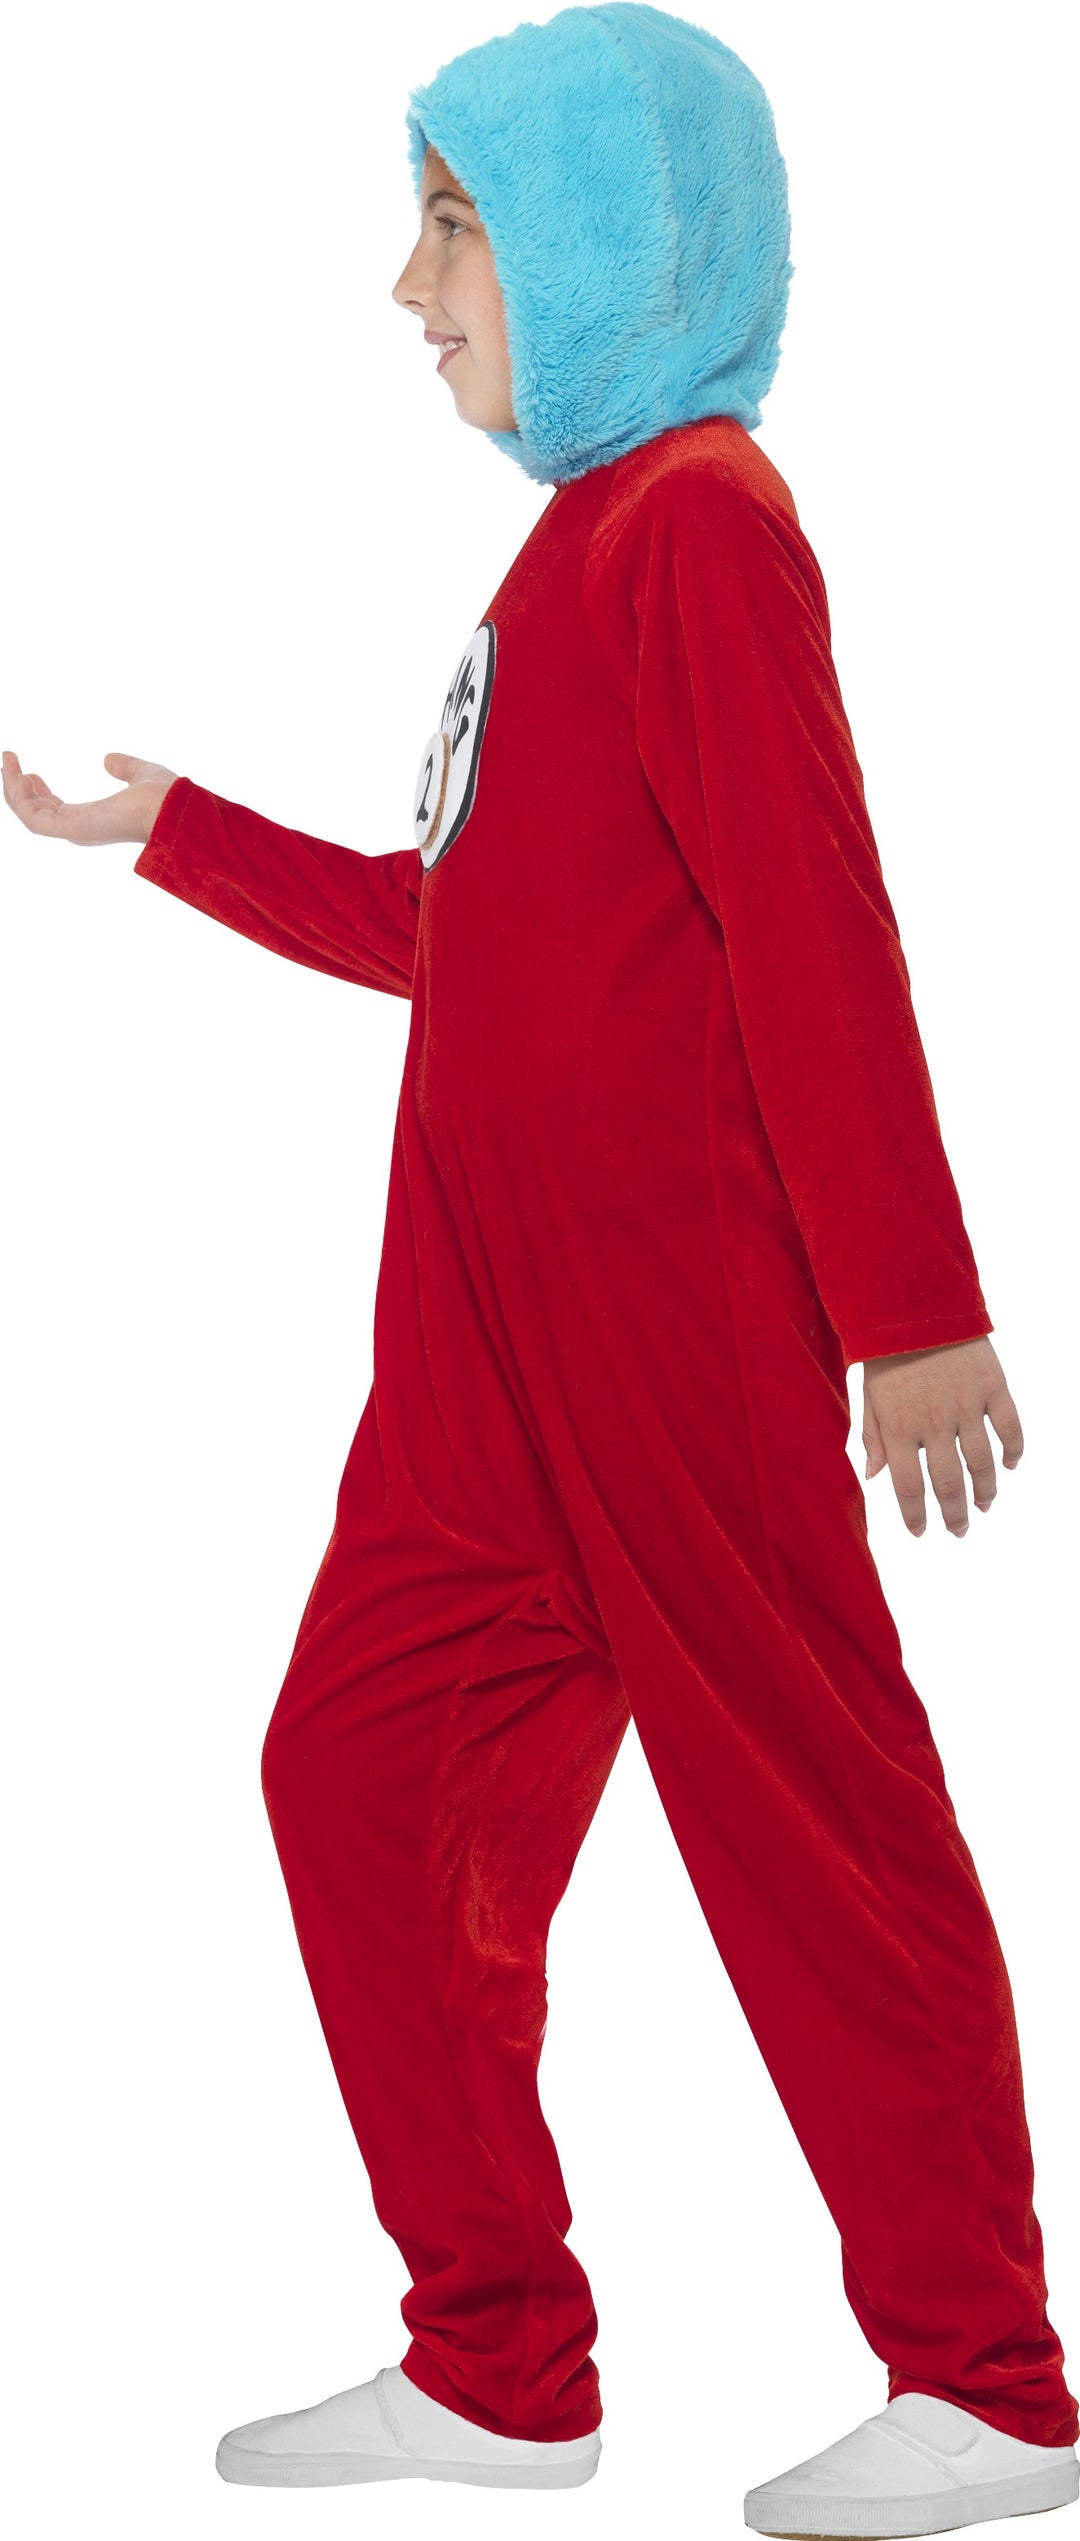 Boys' Thing 1 or Thing 2 Book Character Costume